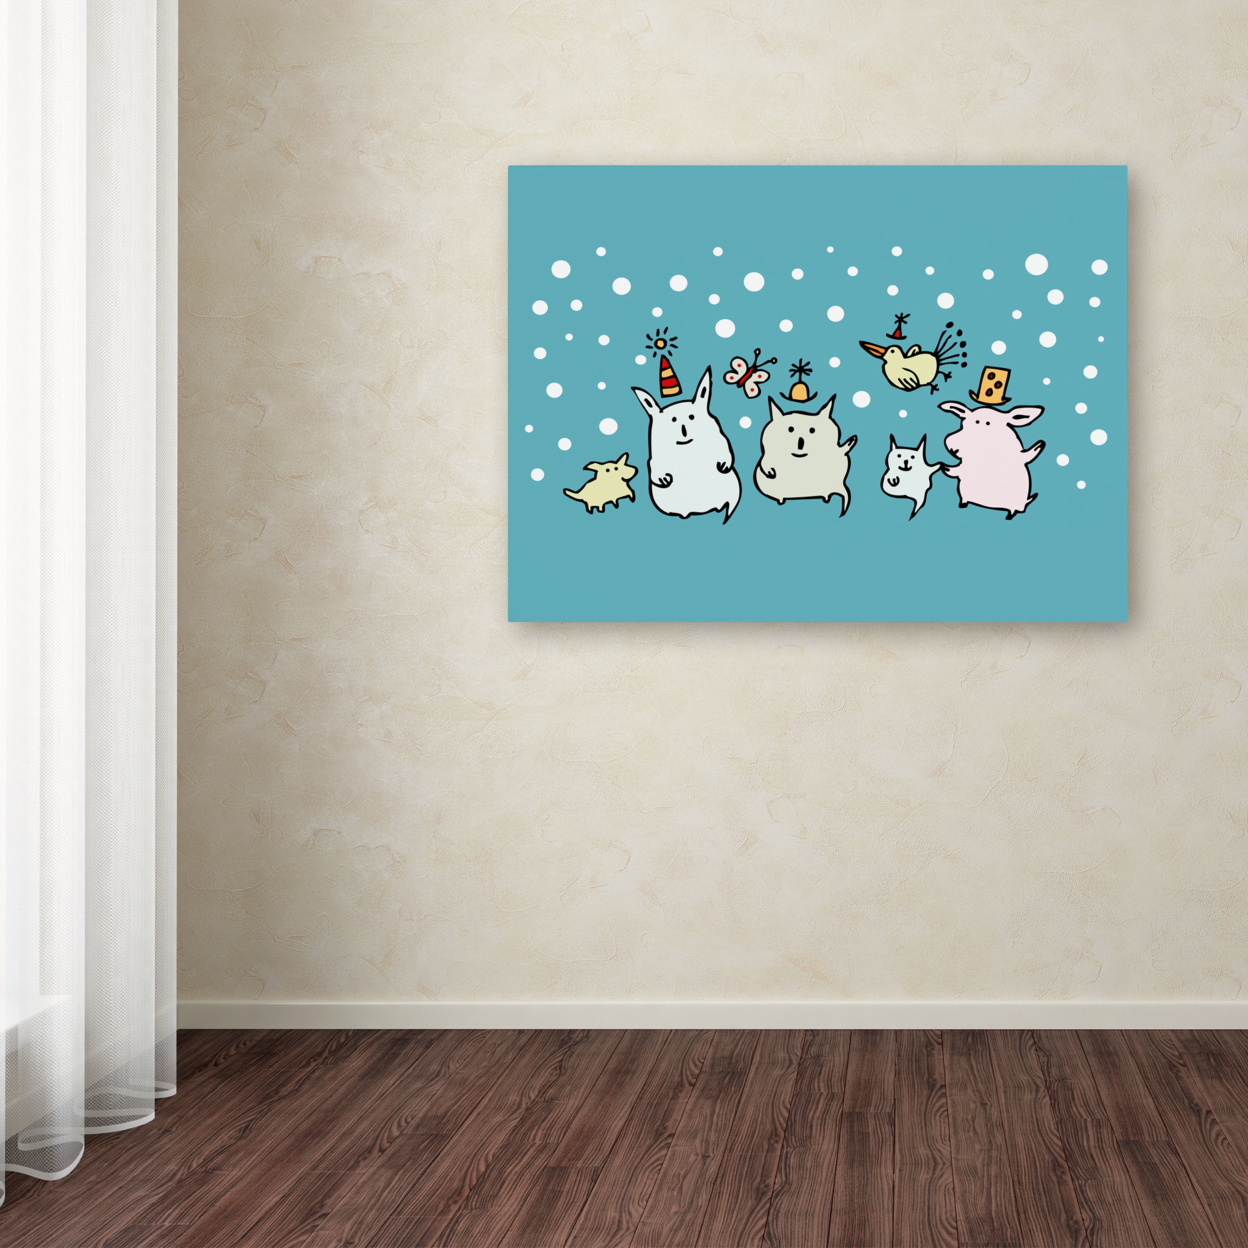 Carla Martell 'Christmas Creatures In Blue' Canvas Wall Art 35 X 47 Inches